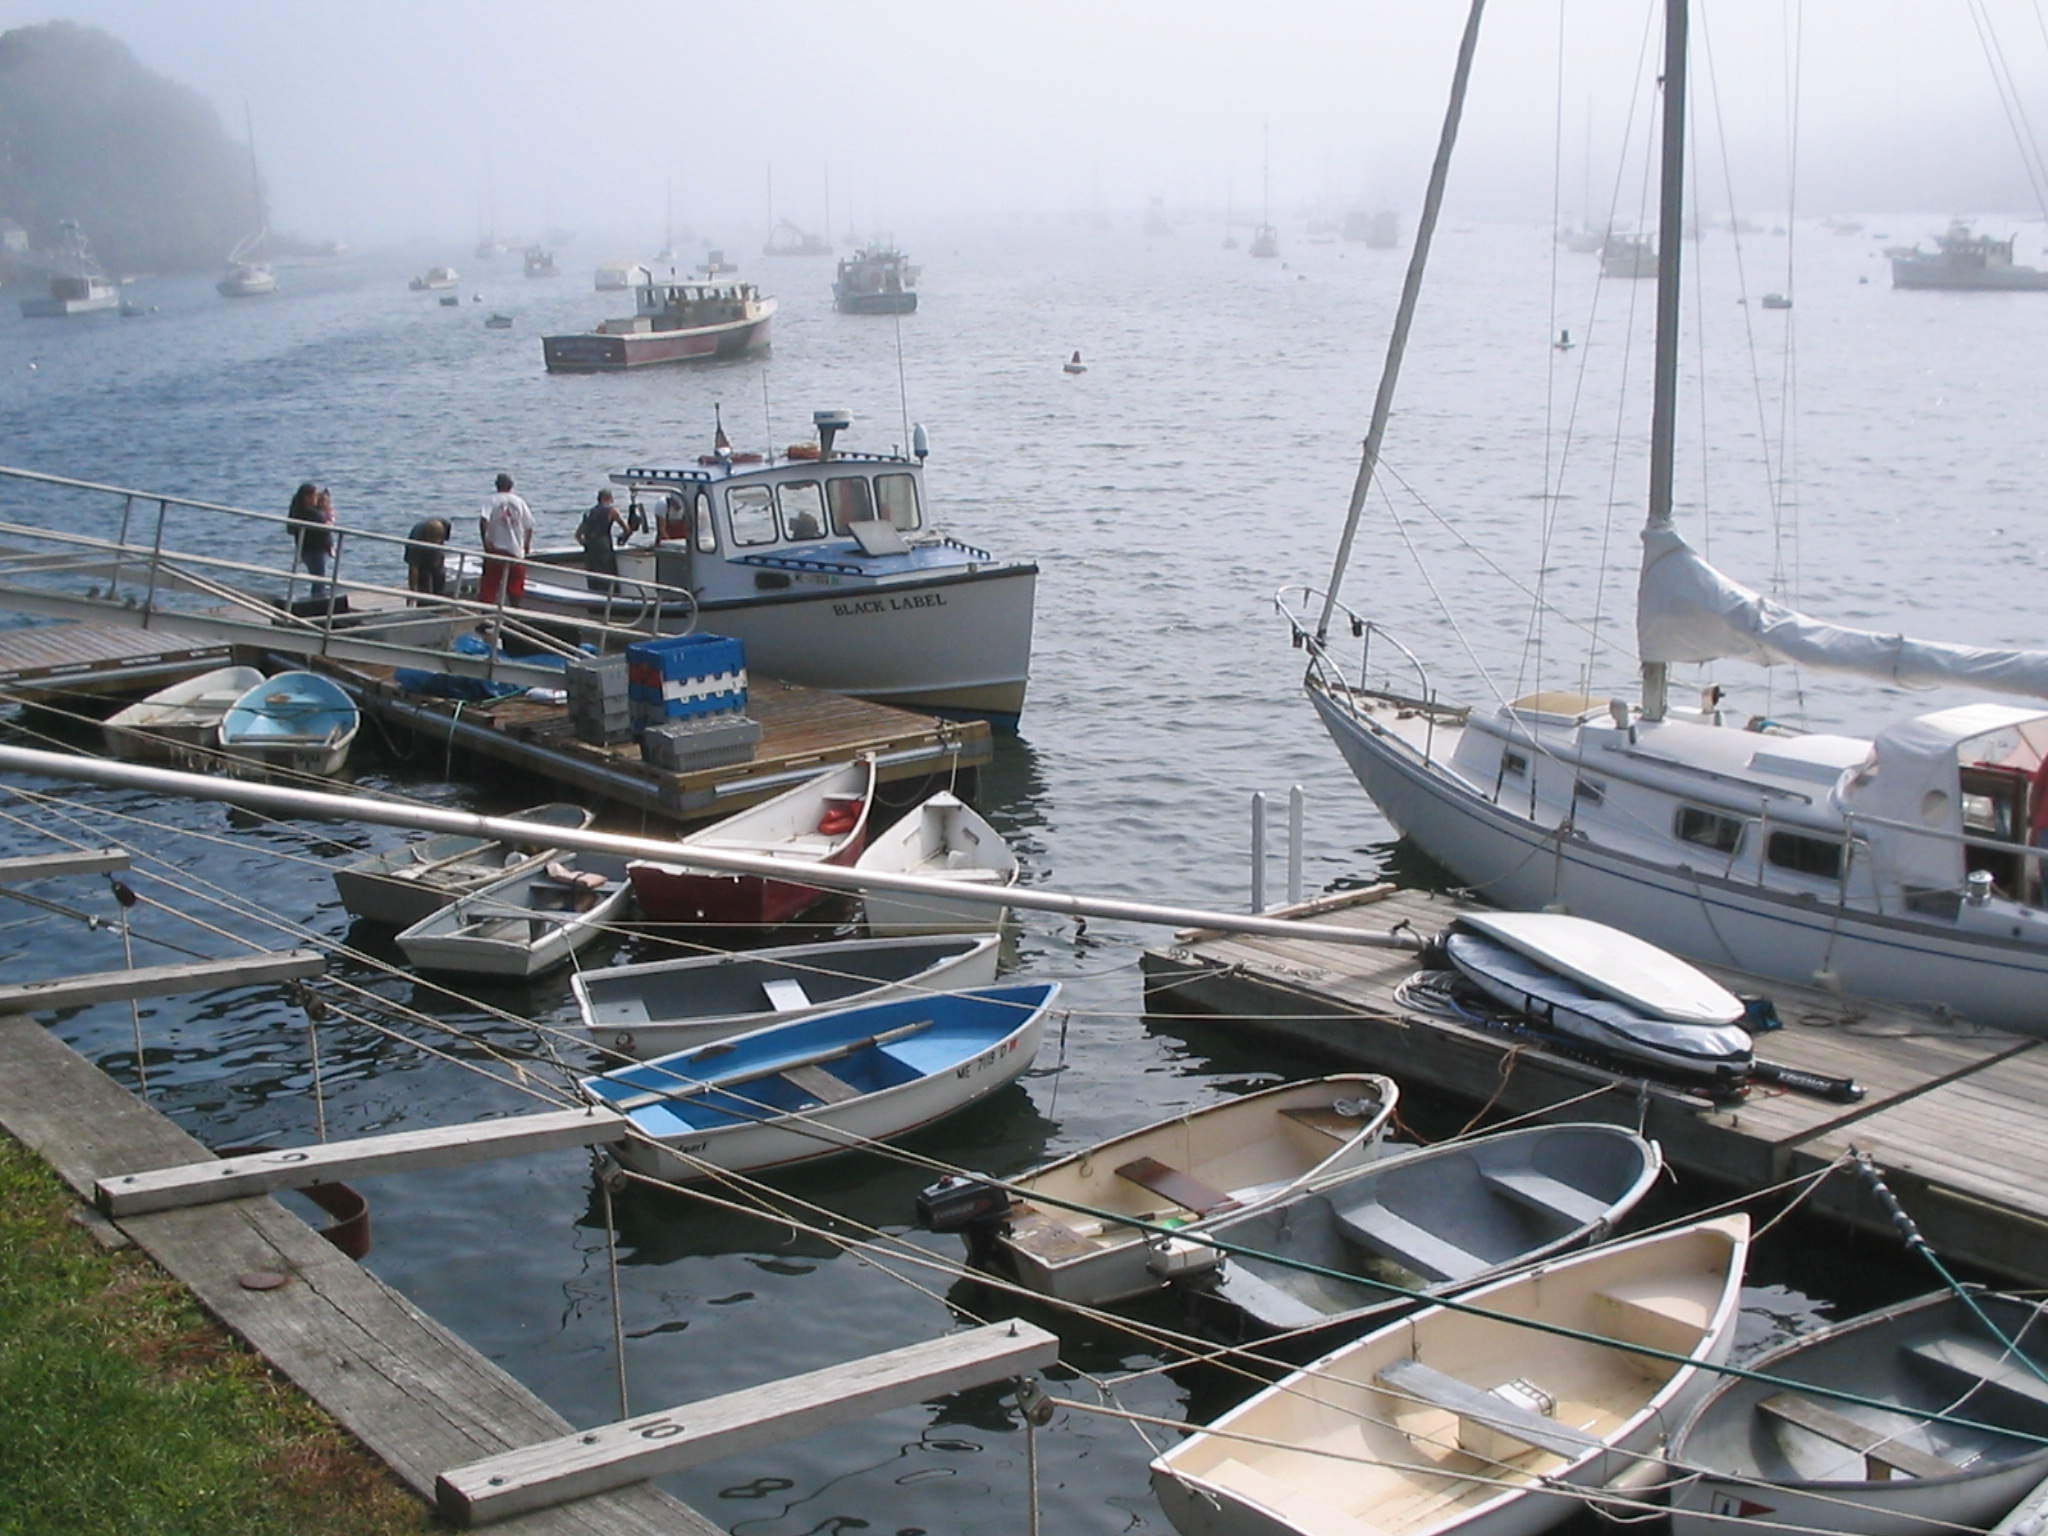 Rockport Harbor (user submitted)